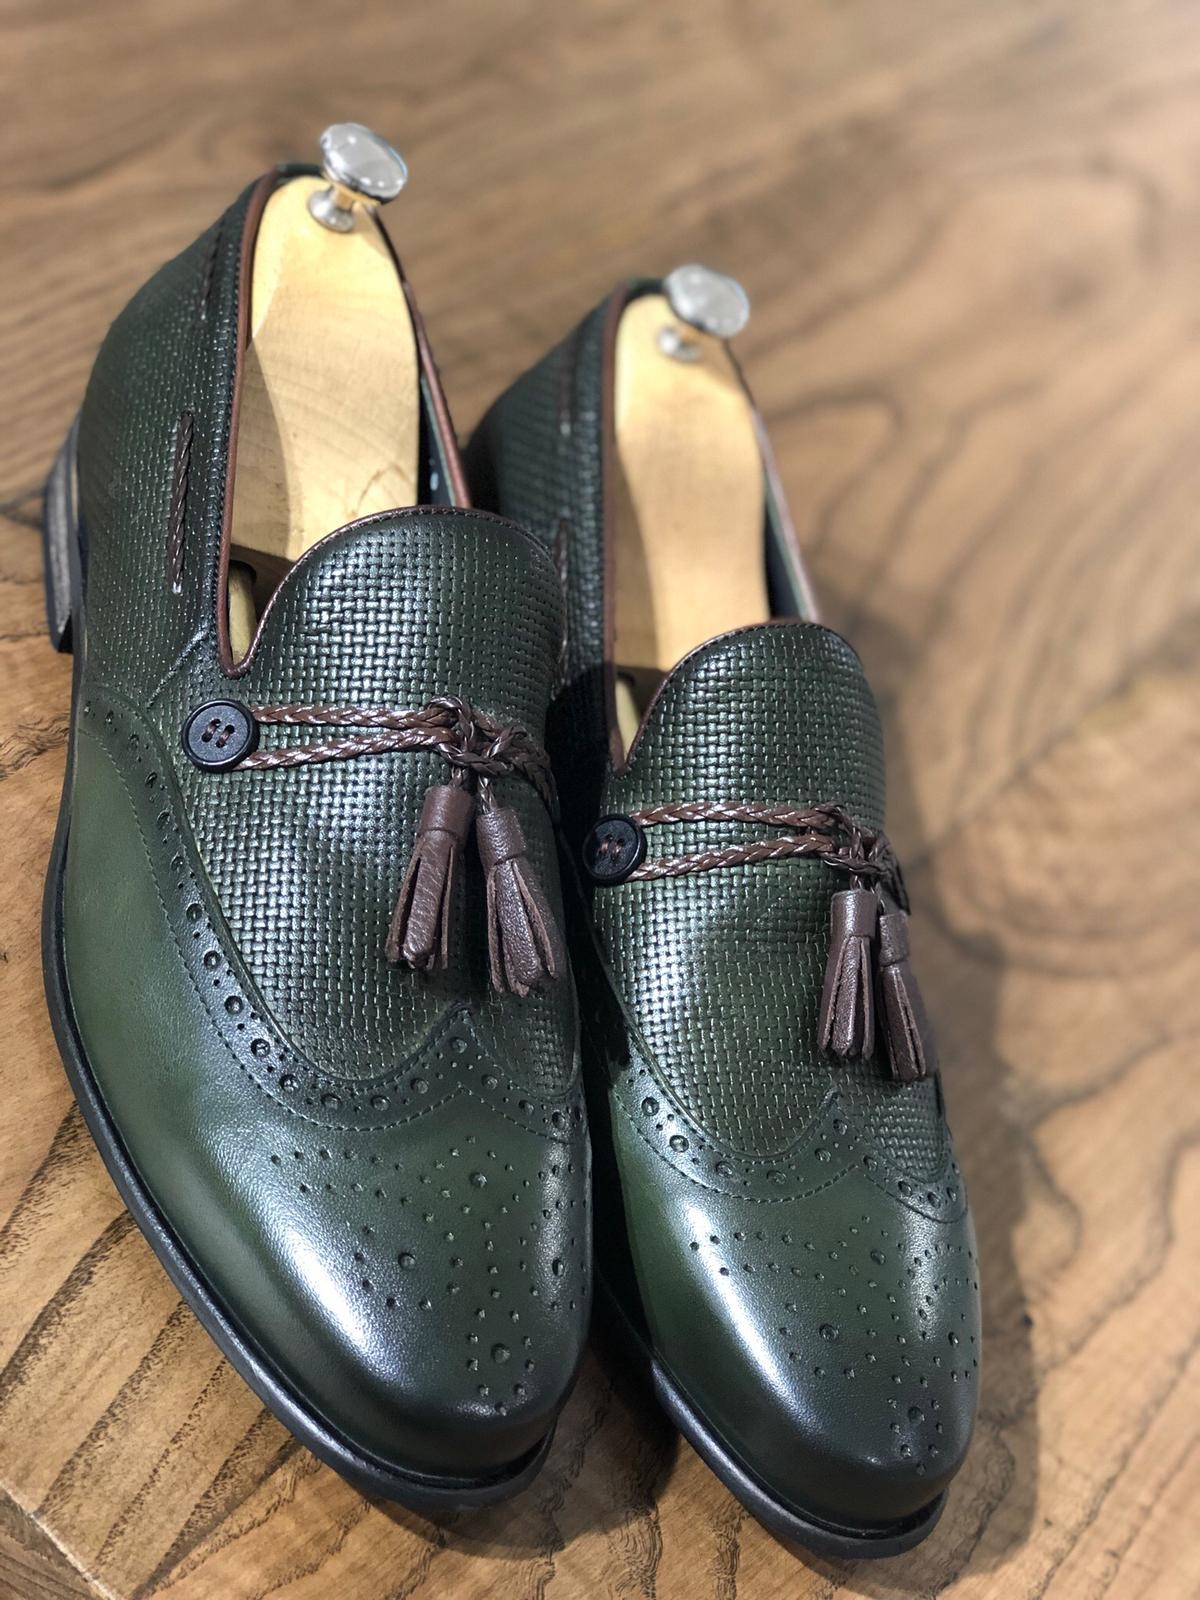 Buy Khaki Tassel Loafer by Gentwith.com with Free Shipping